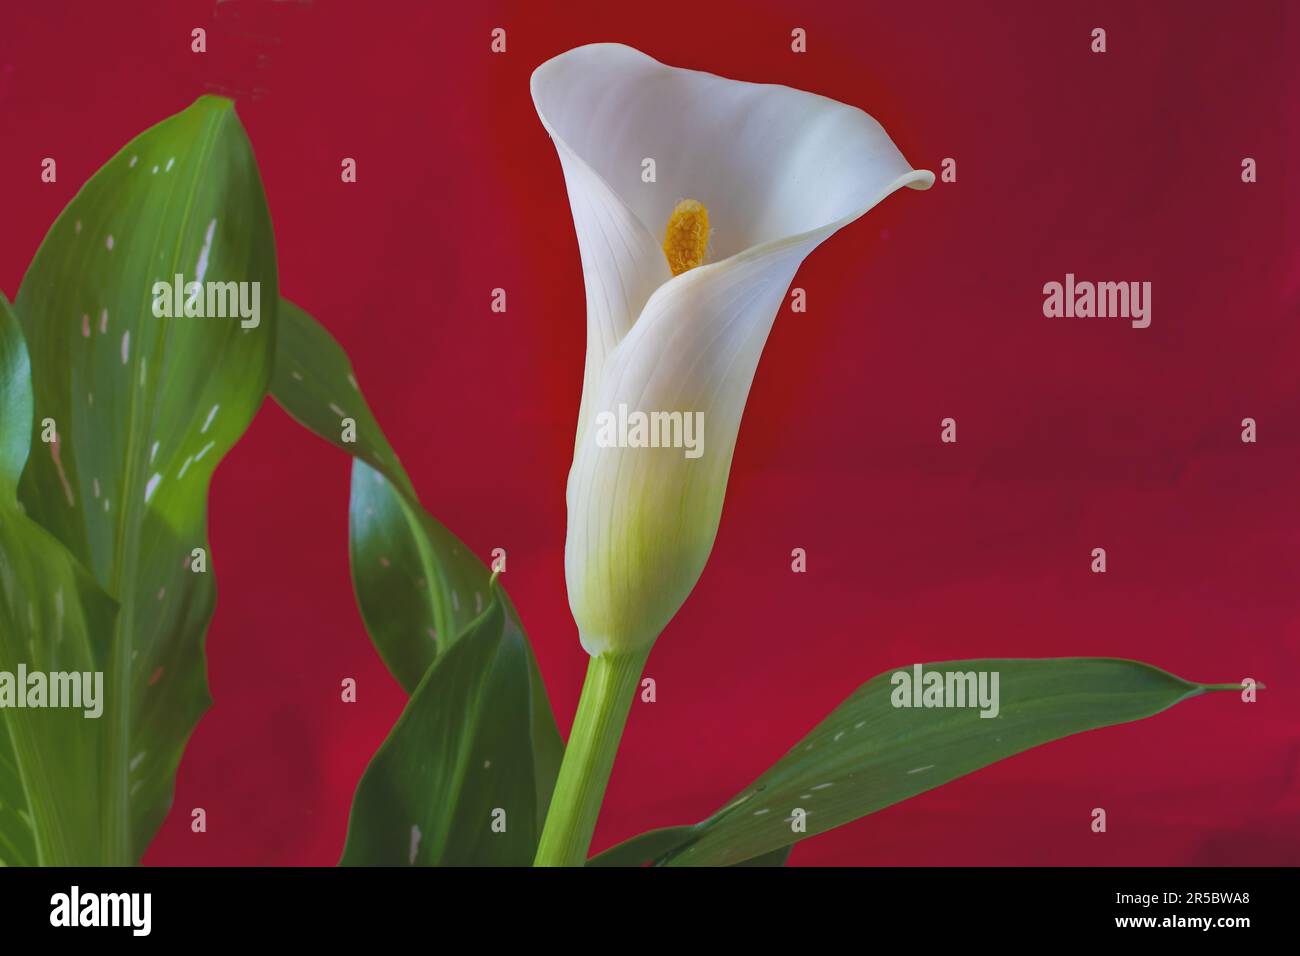 A beautiful single white lily in close against a red background Stock Photo